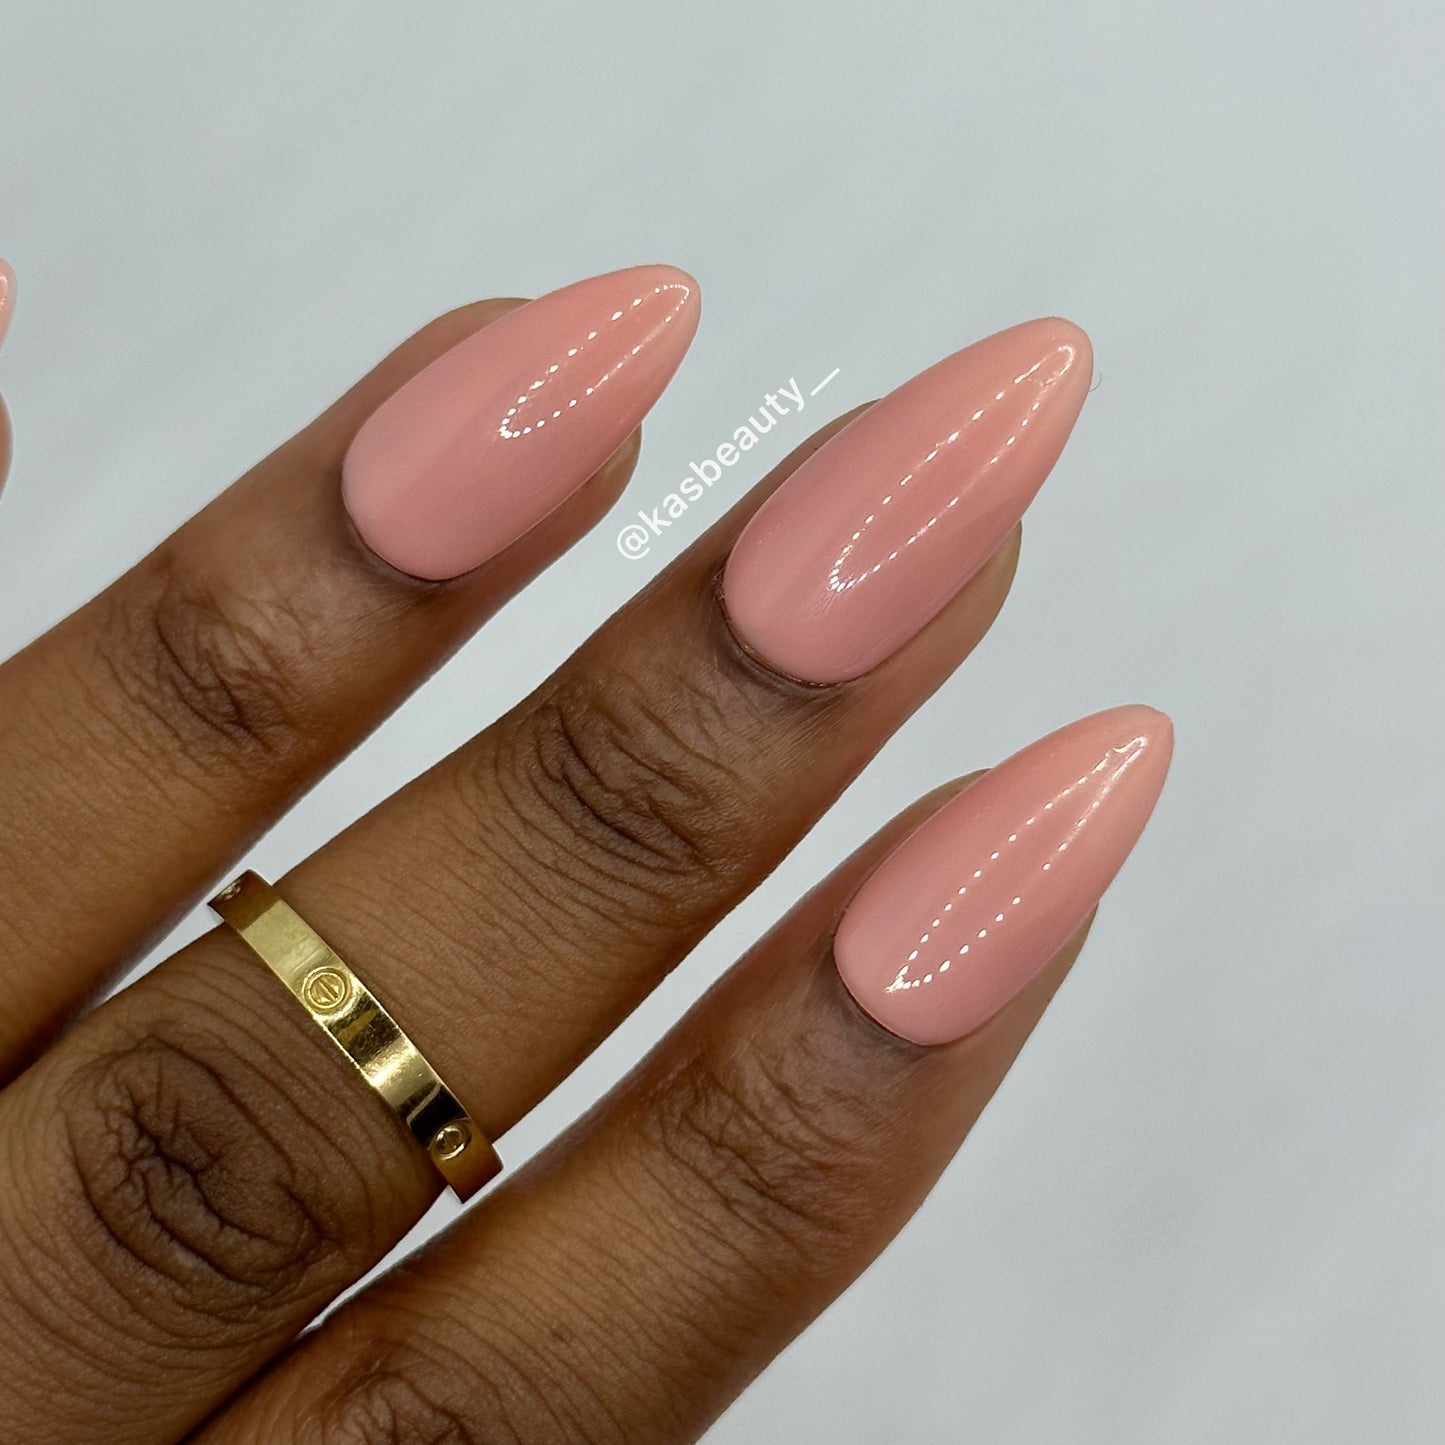 Pink Nude Press On Nails